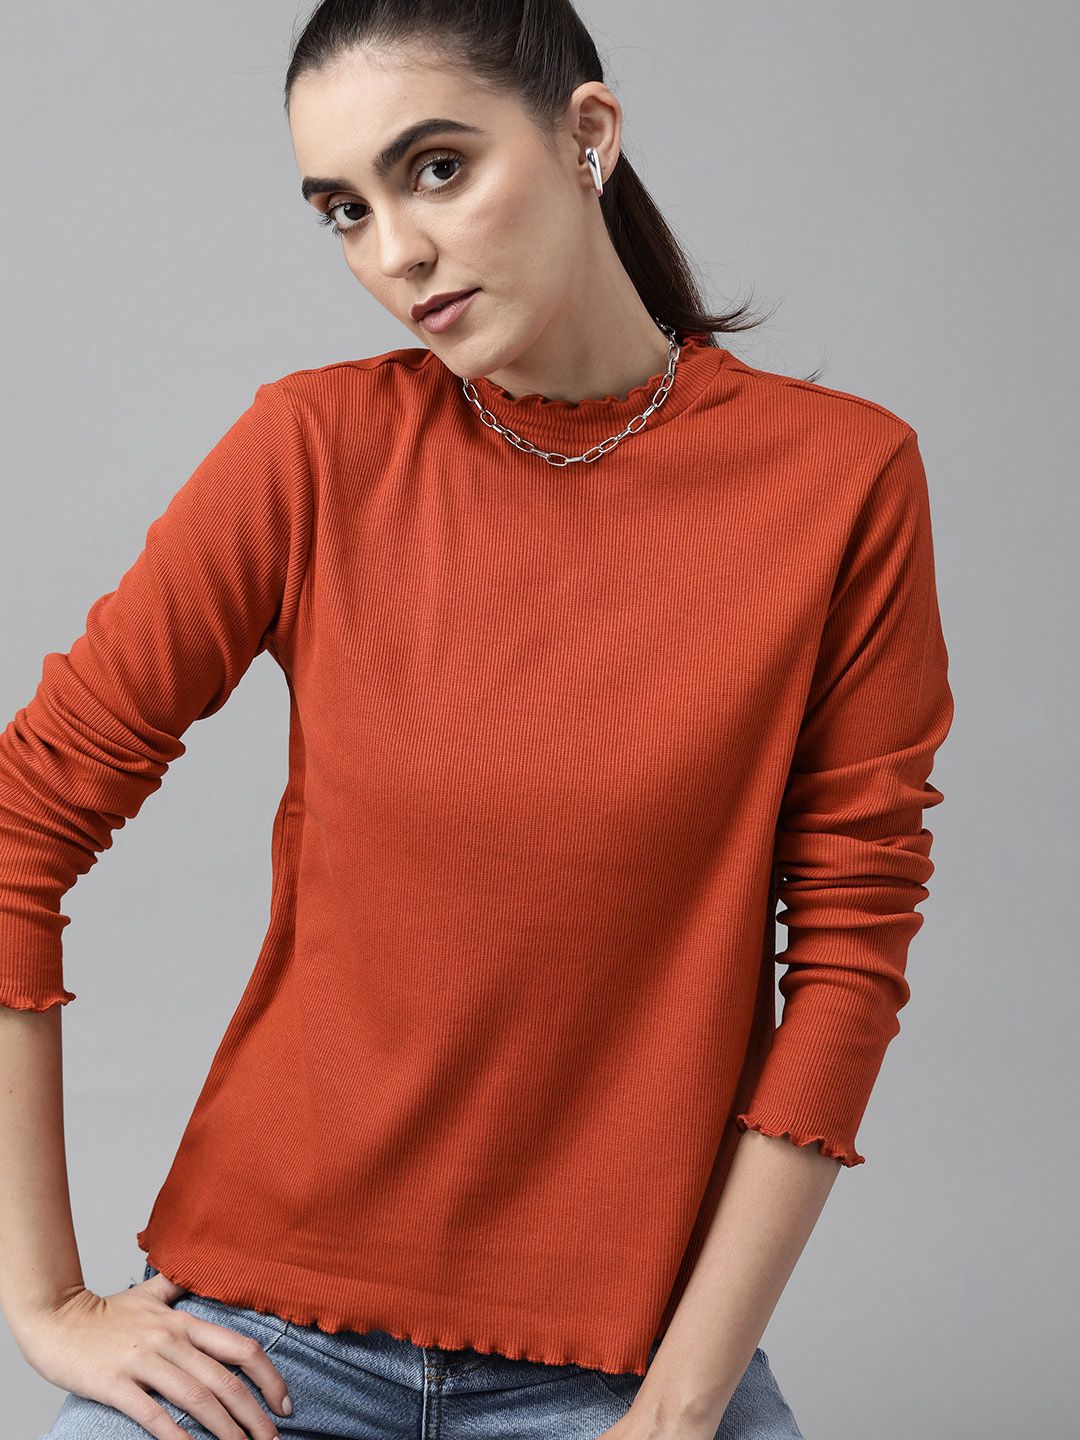 Roadster Rust Orange Ribbed Top with Lettuce Edges Price in India